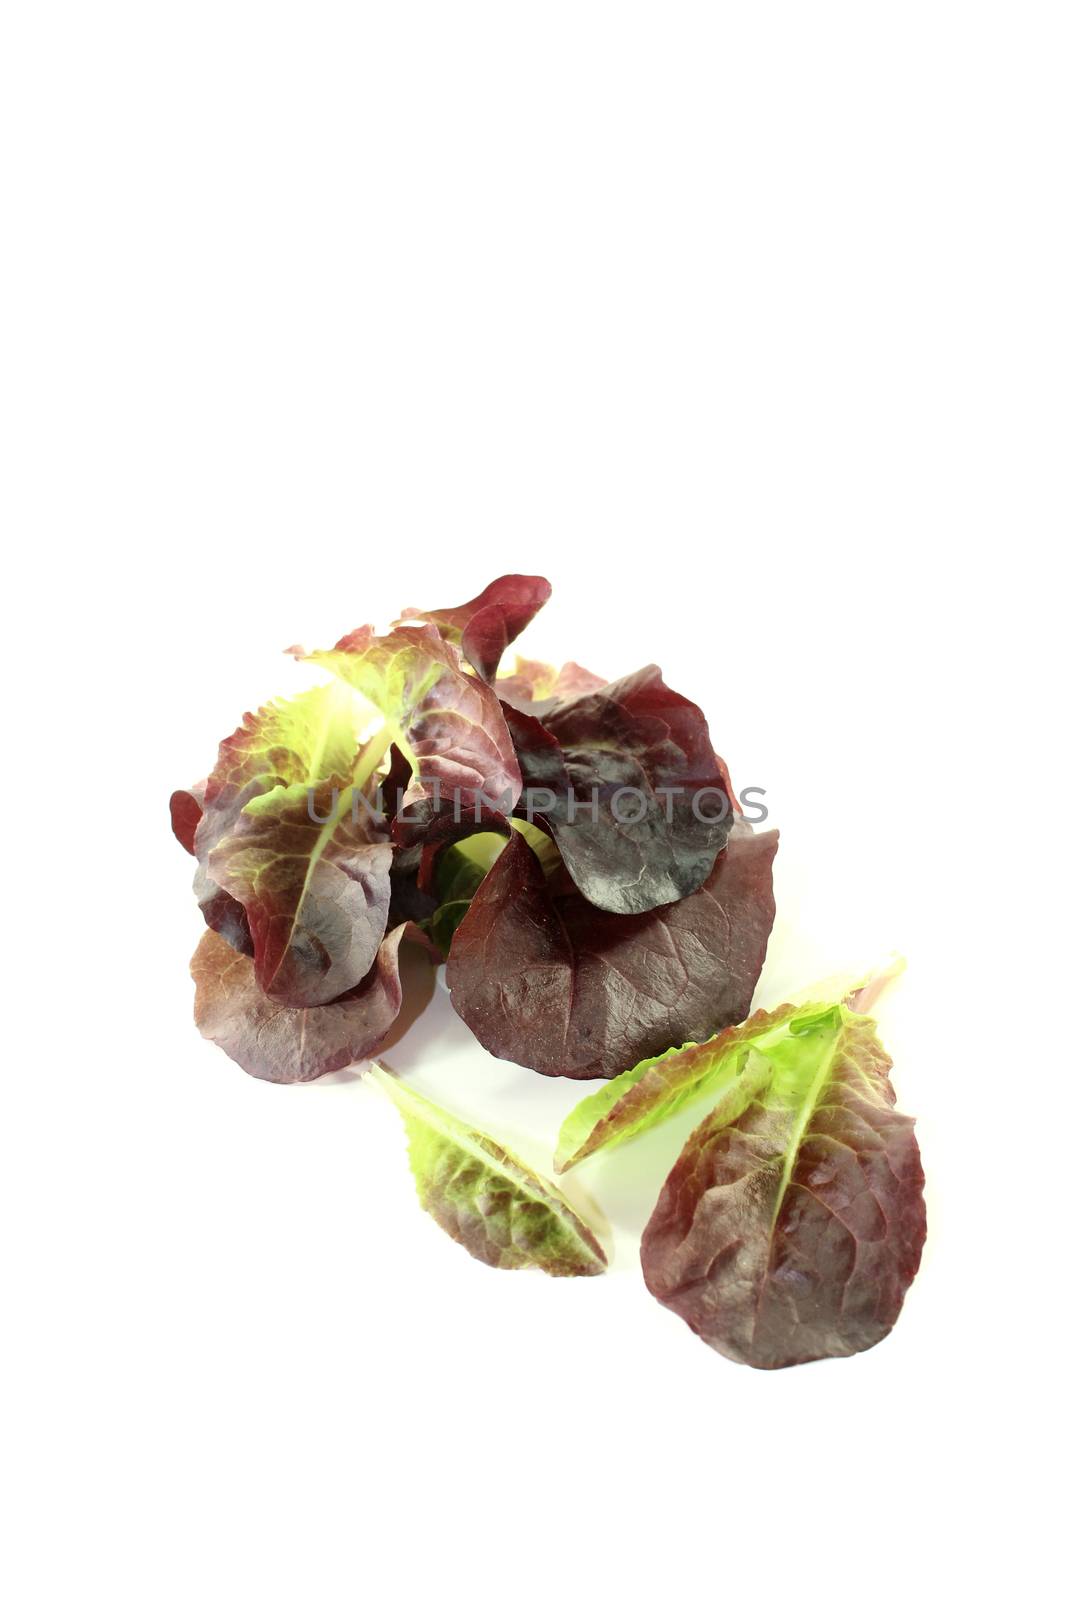 delicious red lettuce on a bright background